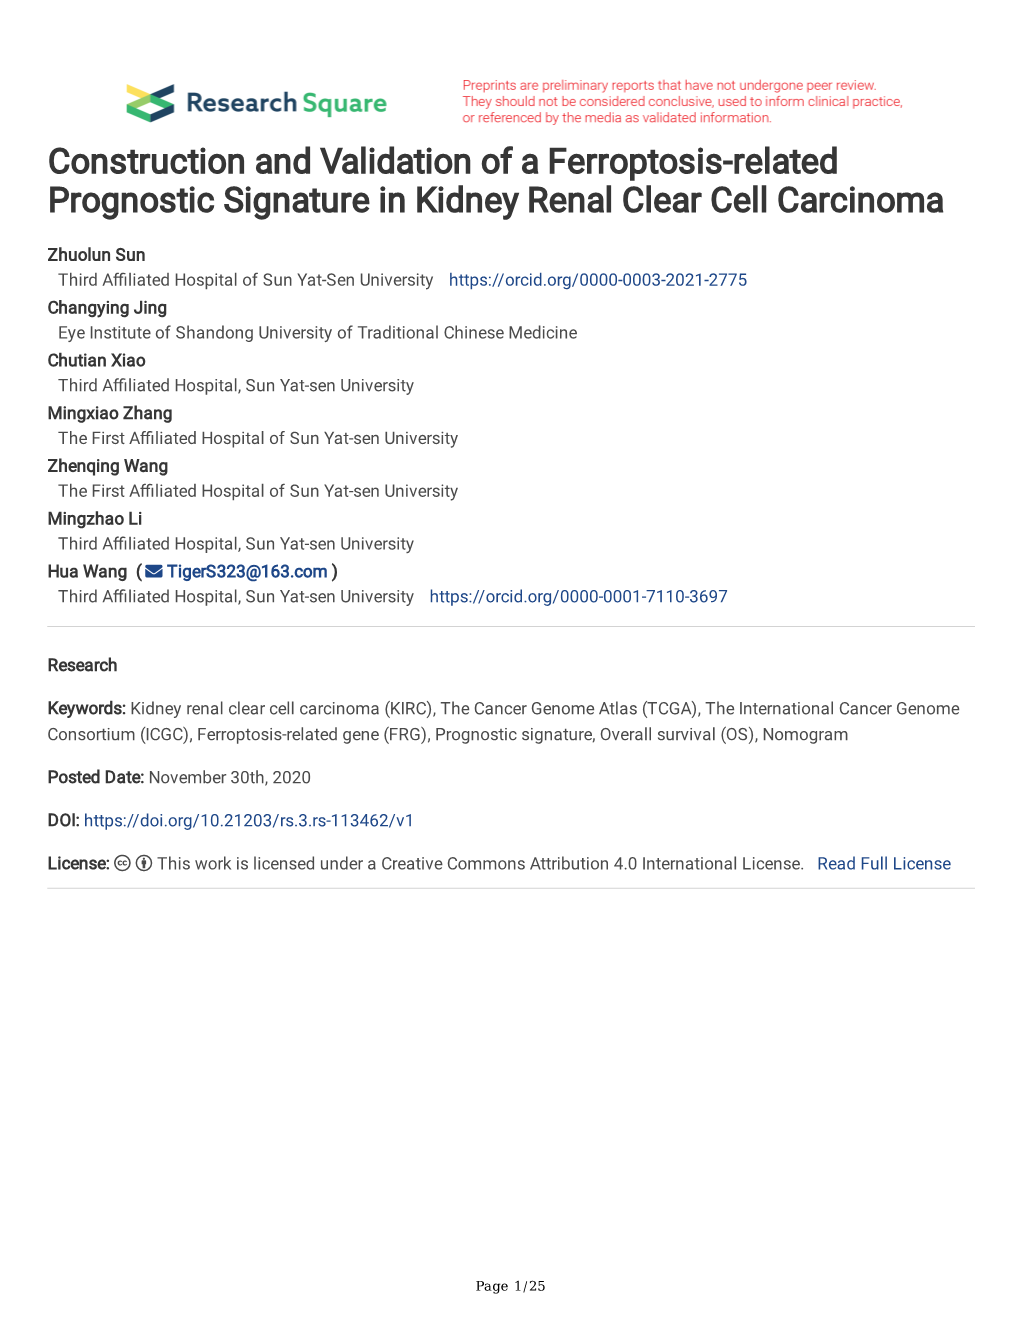 Construction and Validation of a Ferroptosis-Related Prognostic Signature in Kidney Renal Clear Cell Carcinoma